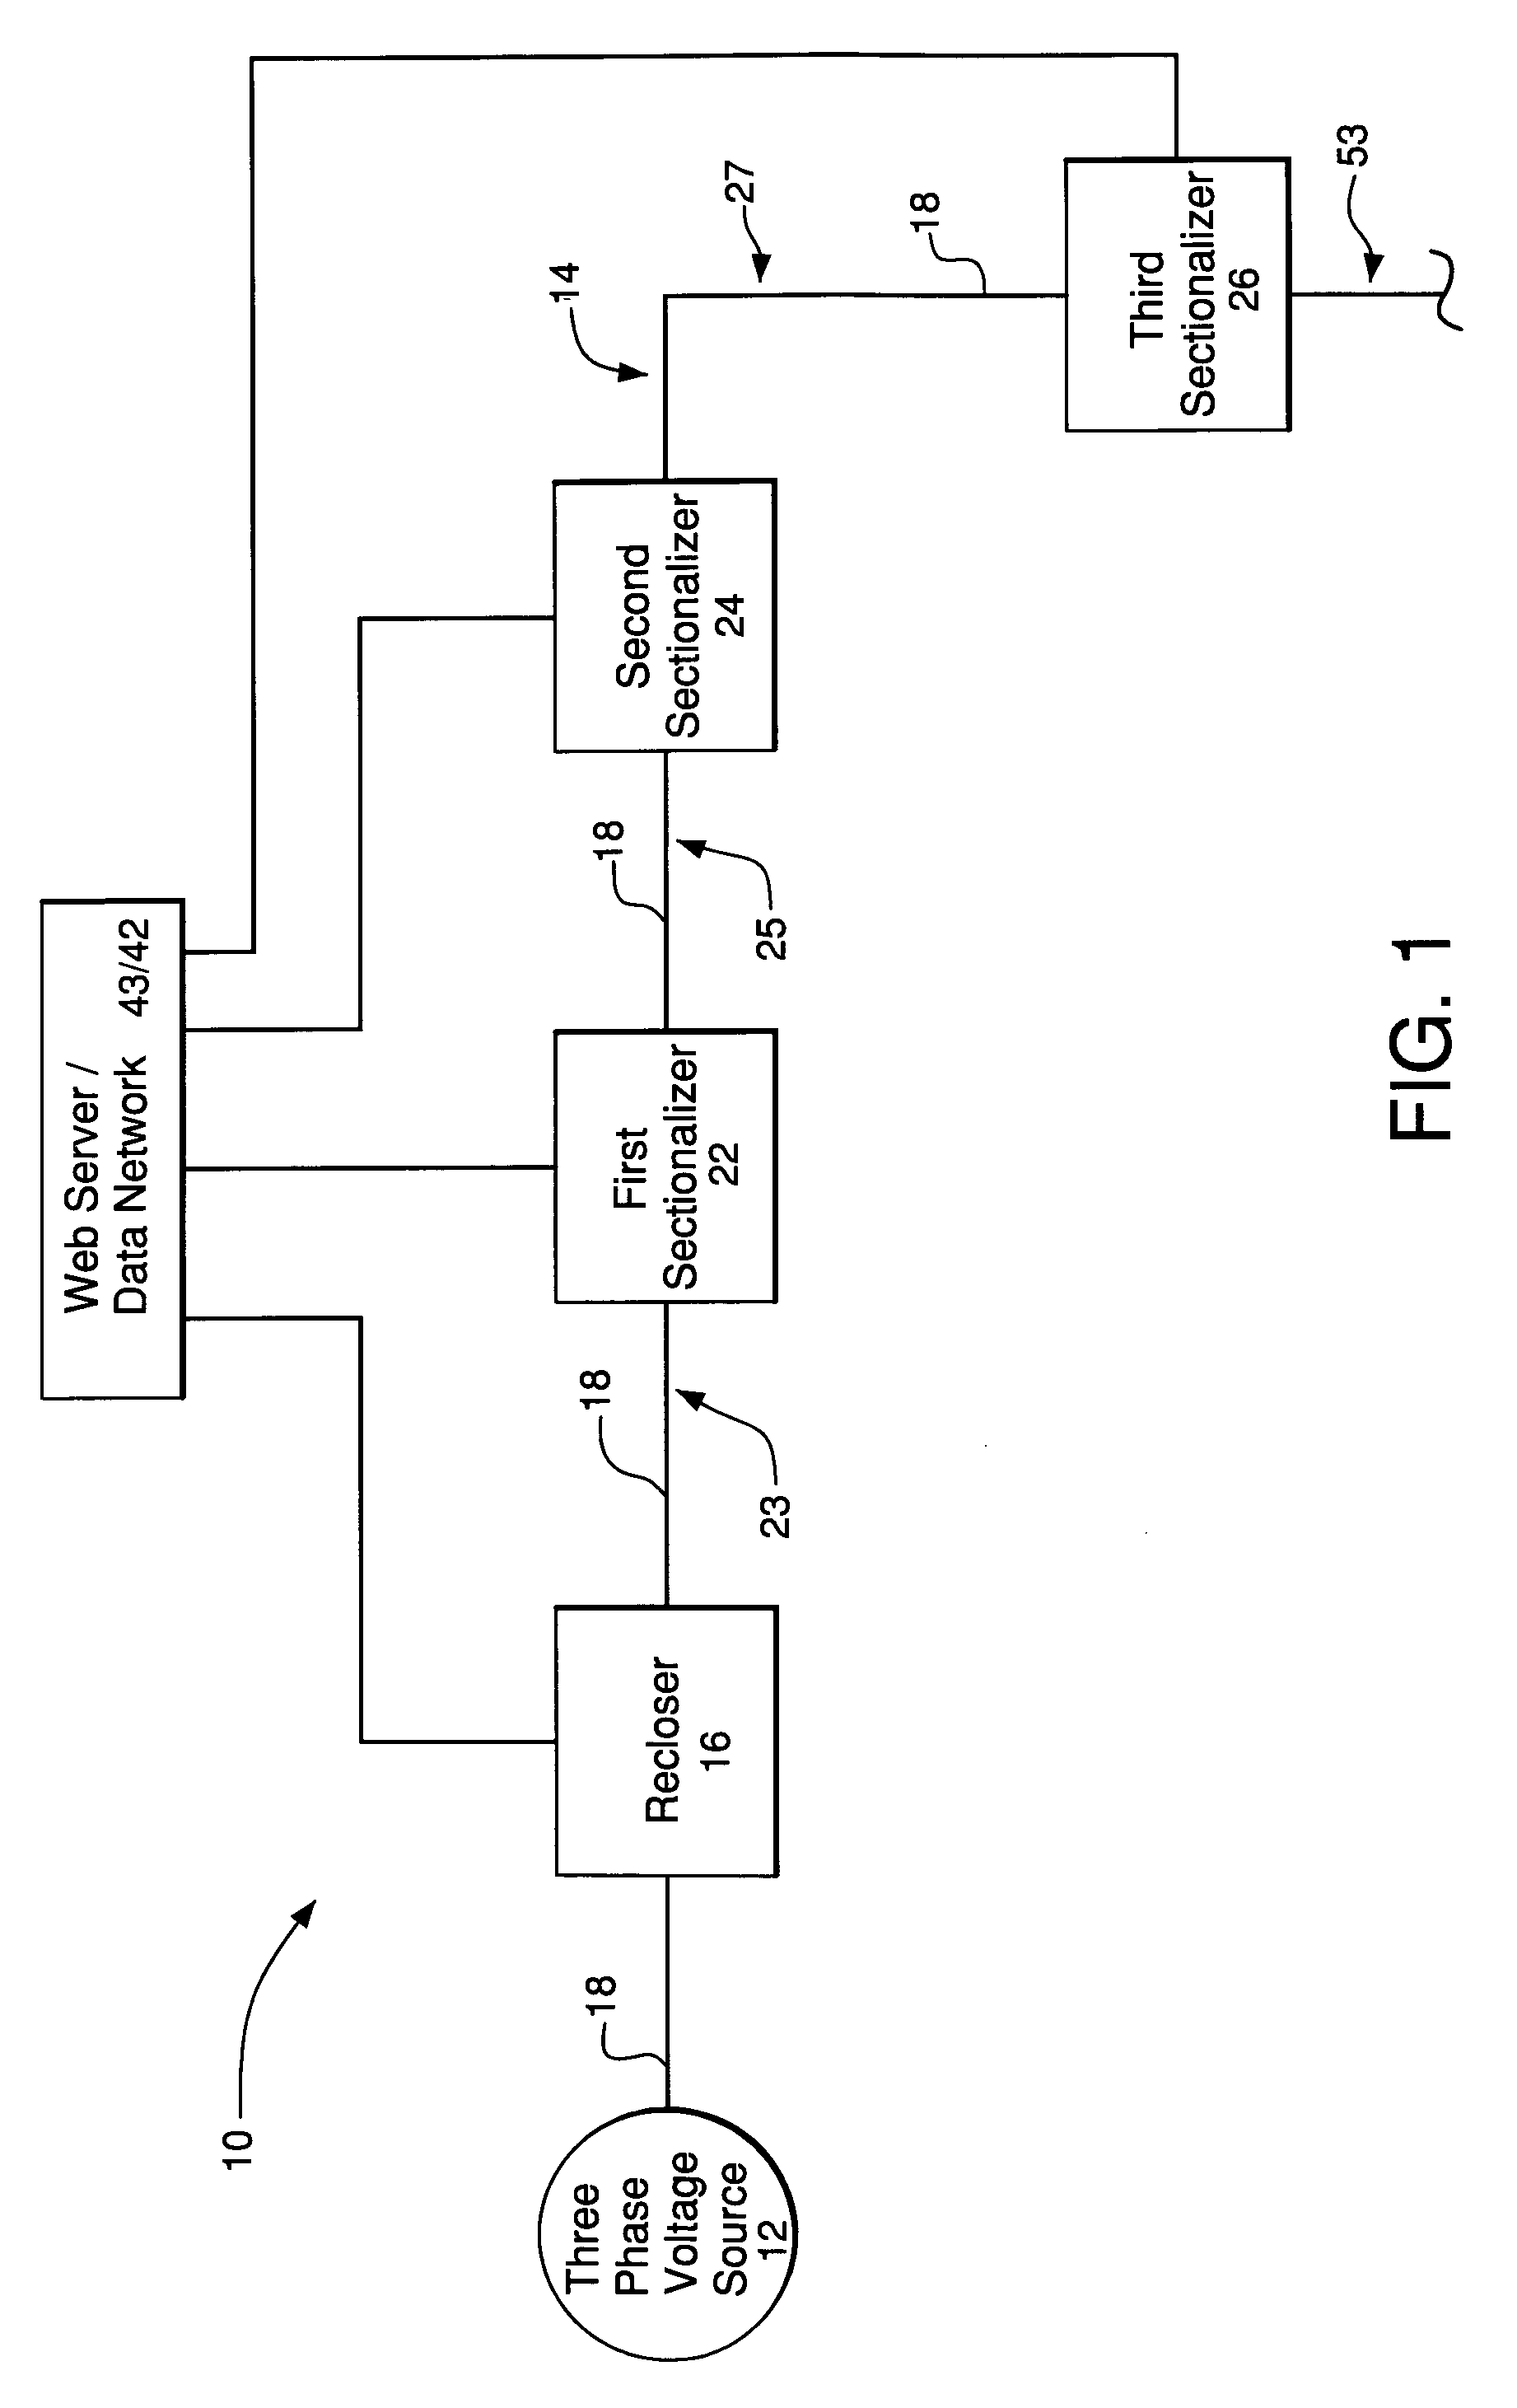 Adaptive protection system for a power-distribution network